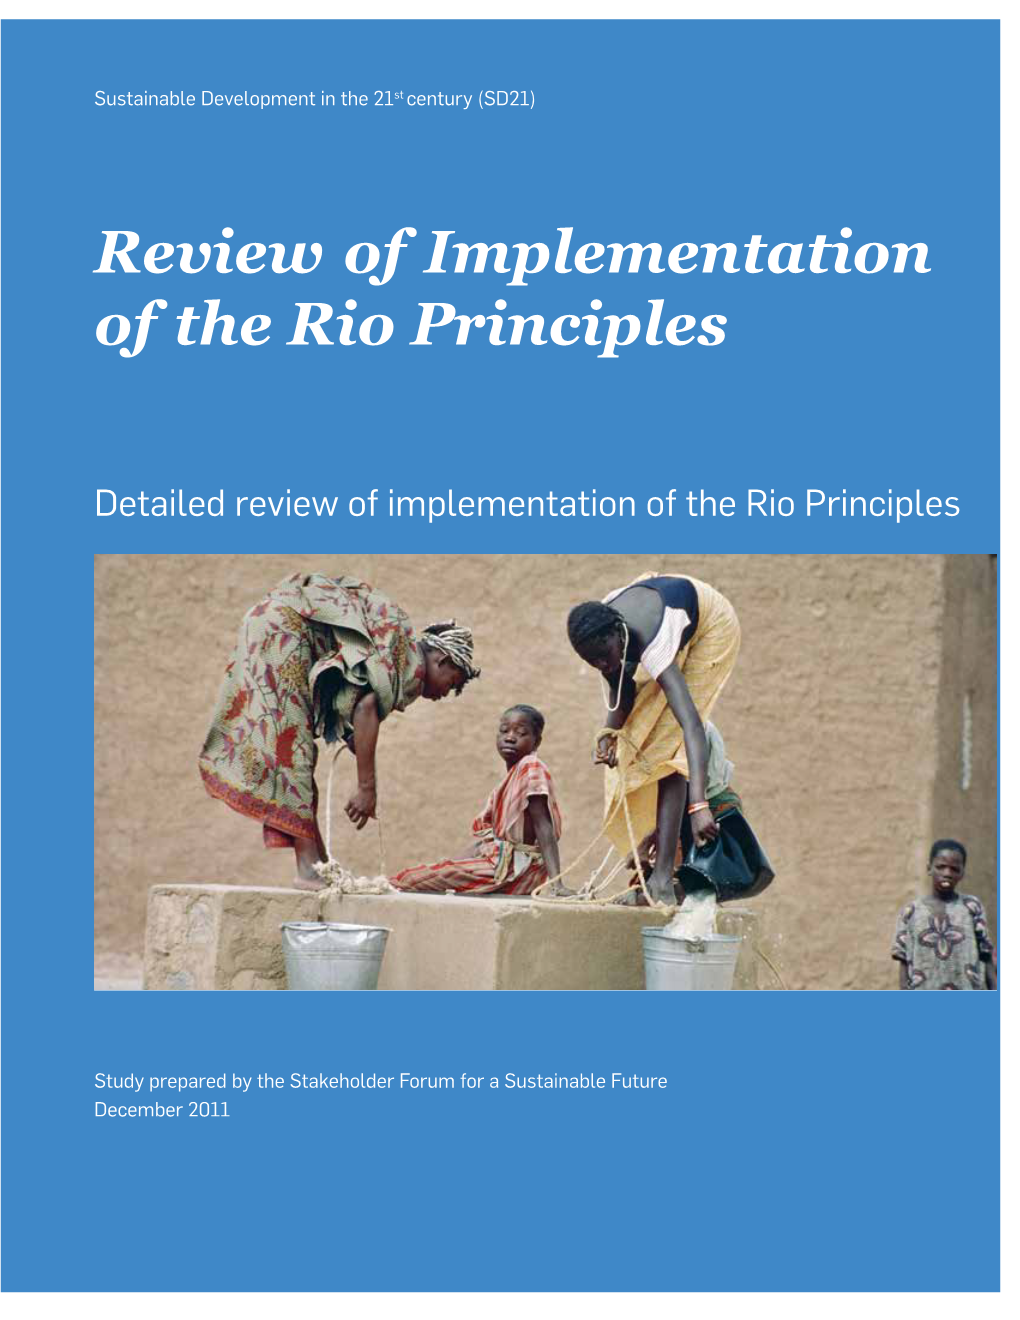 Detailed Review of Implementation of the Rio Principles, December 2011